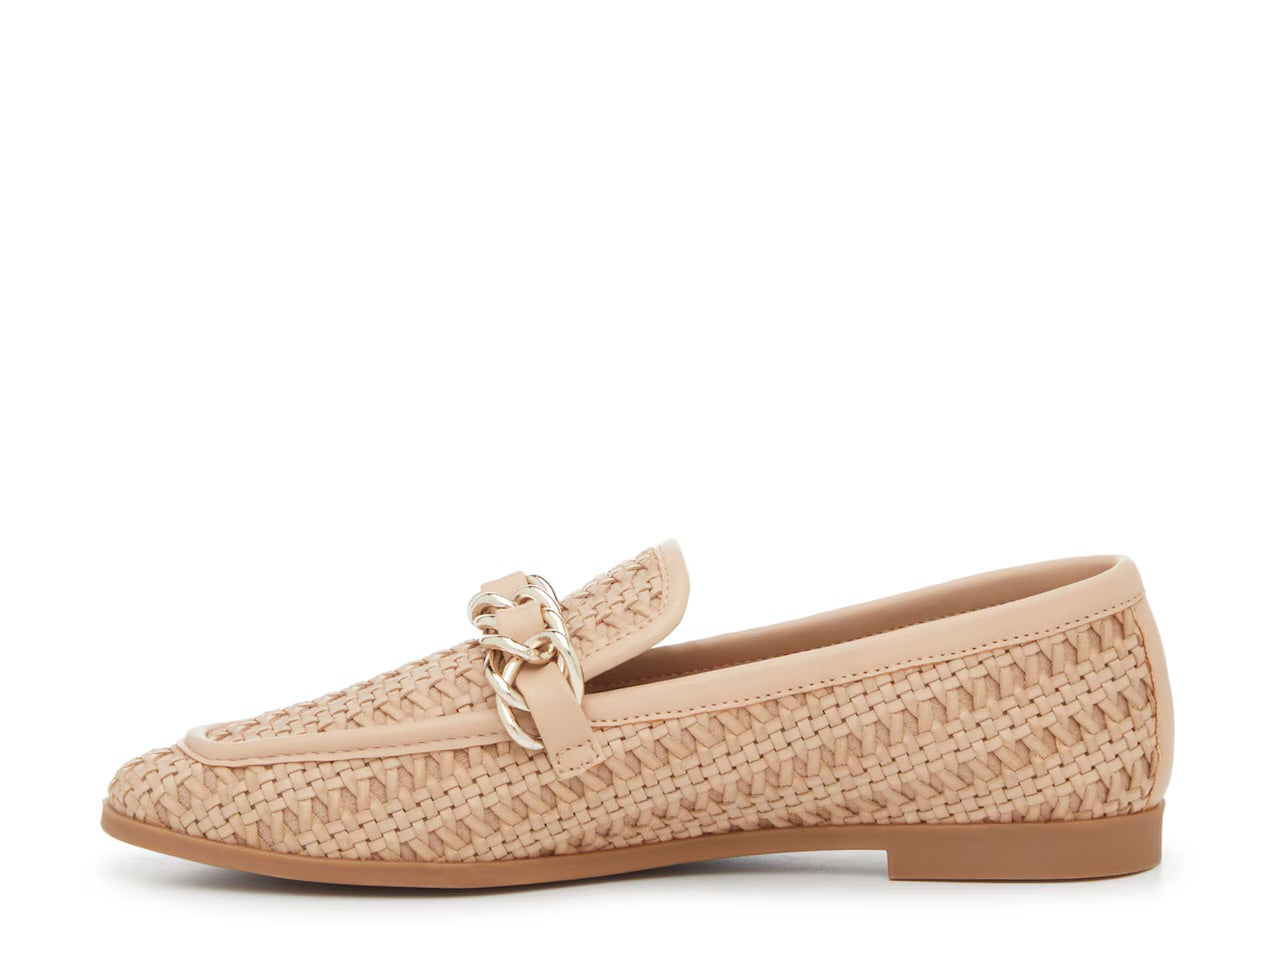 STEVE MADDEN WOVEN DESIGN LOAFERS IN NATURAL TAN